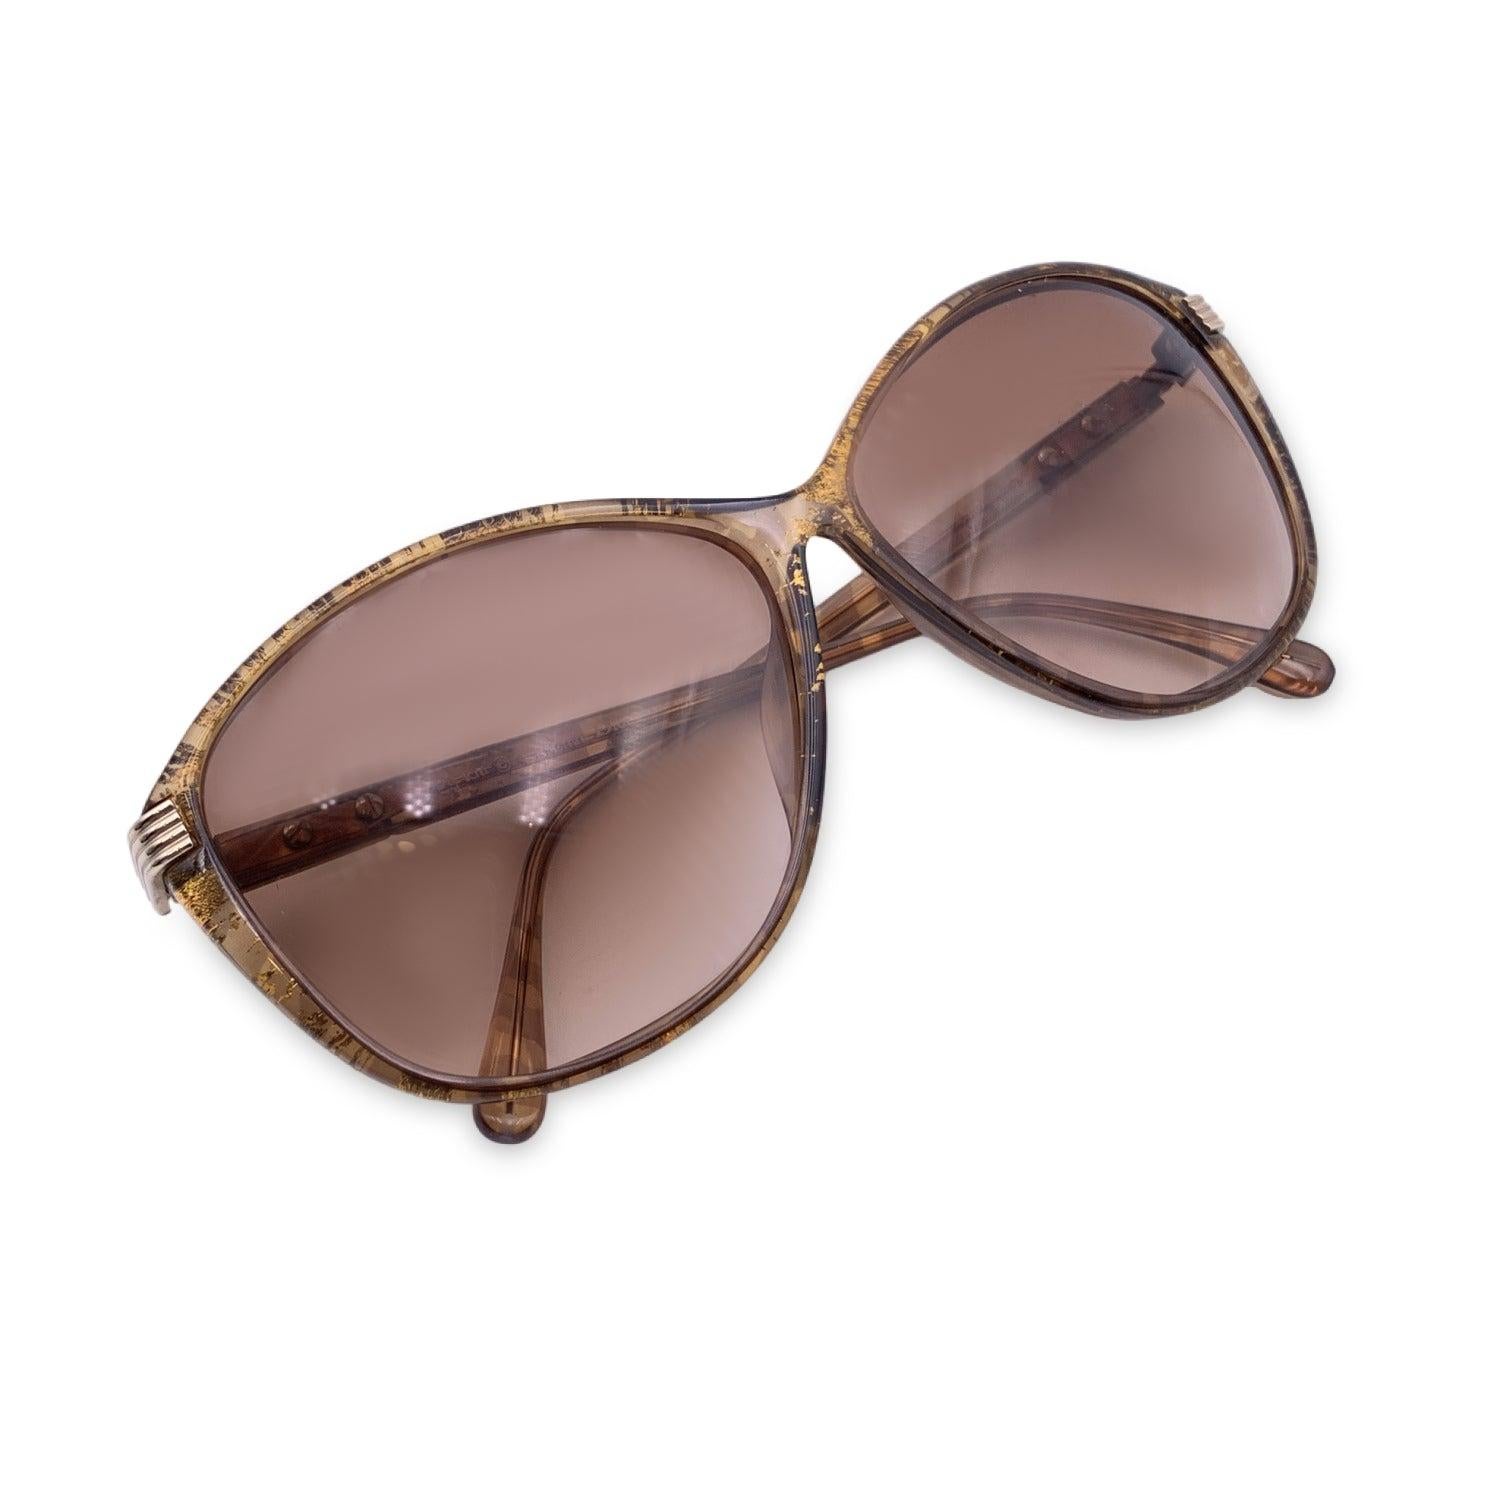 Vintage Christian Dior Women Sunglasses, Mod. 2531 31 Optyl. Size: 58/11 135mm. Brown with gold details acetate Optyl frame. 100% Total UVA/UVB protection brown gradient lenses. CD logos on gold metal finish placed on the side of the temples.